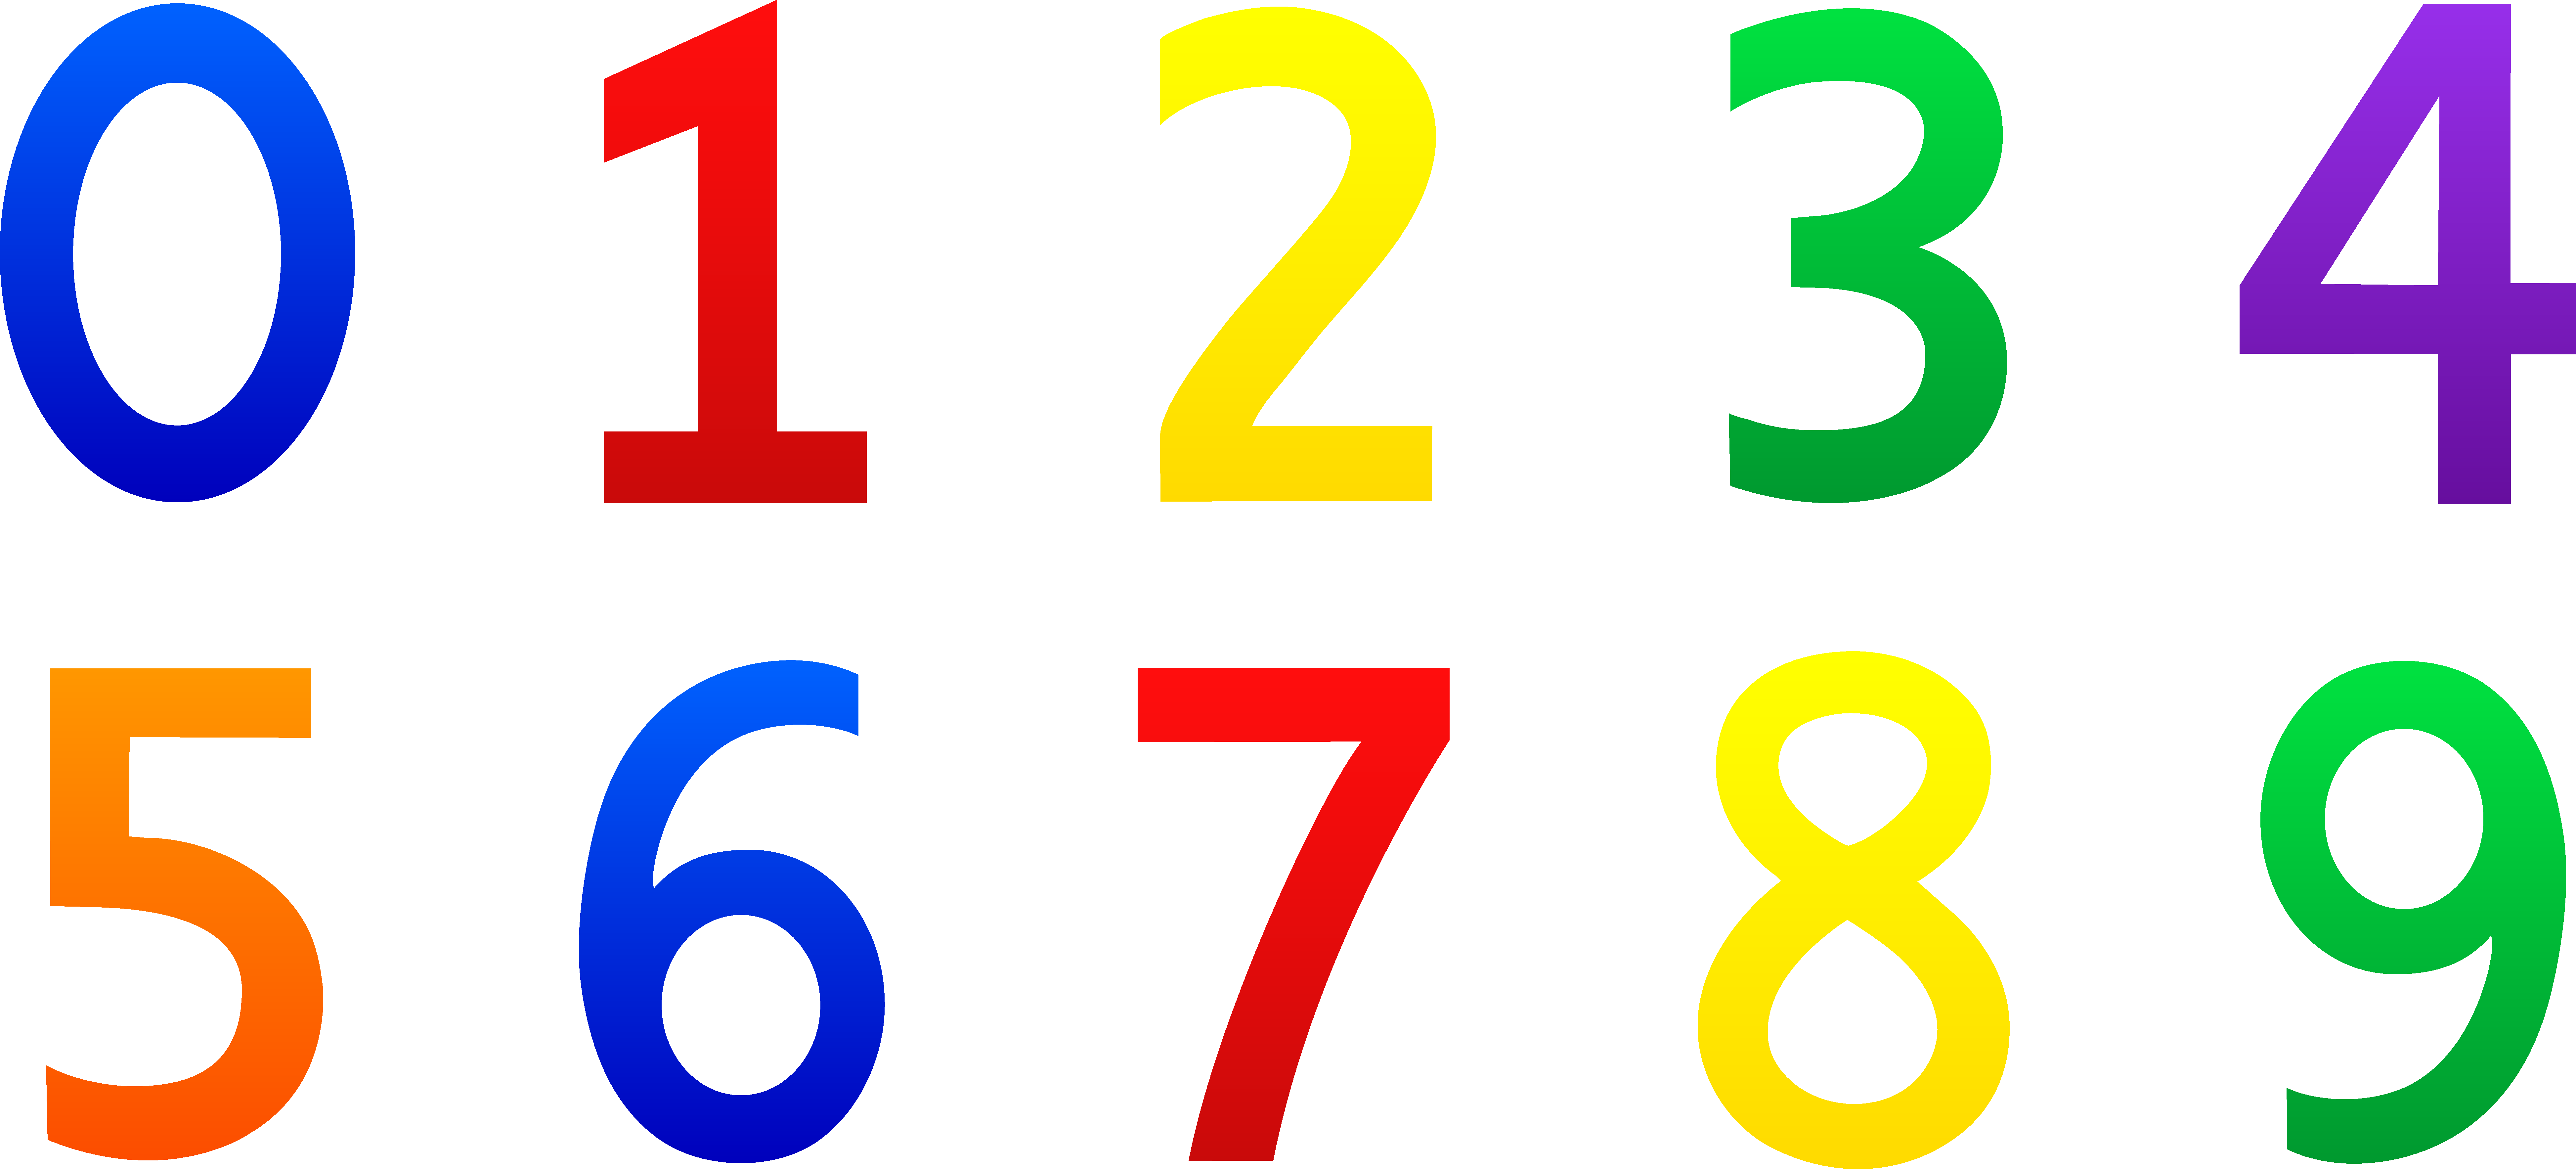 Colorful number 20 clipart